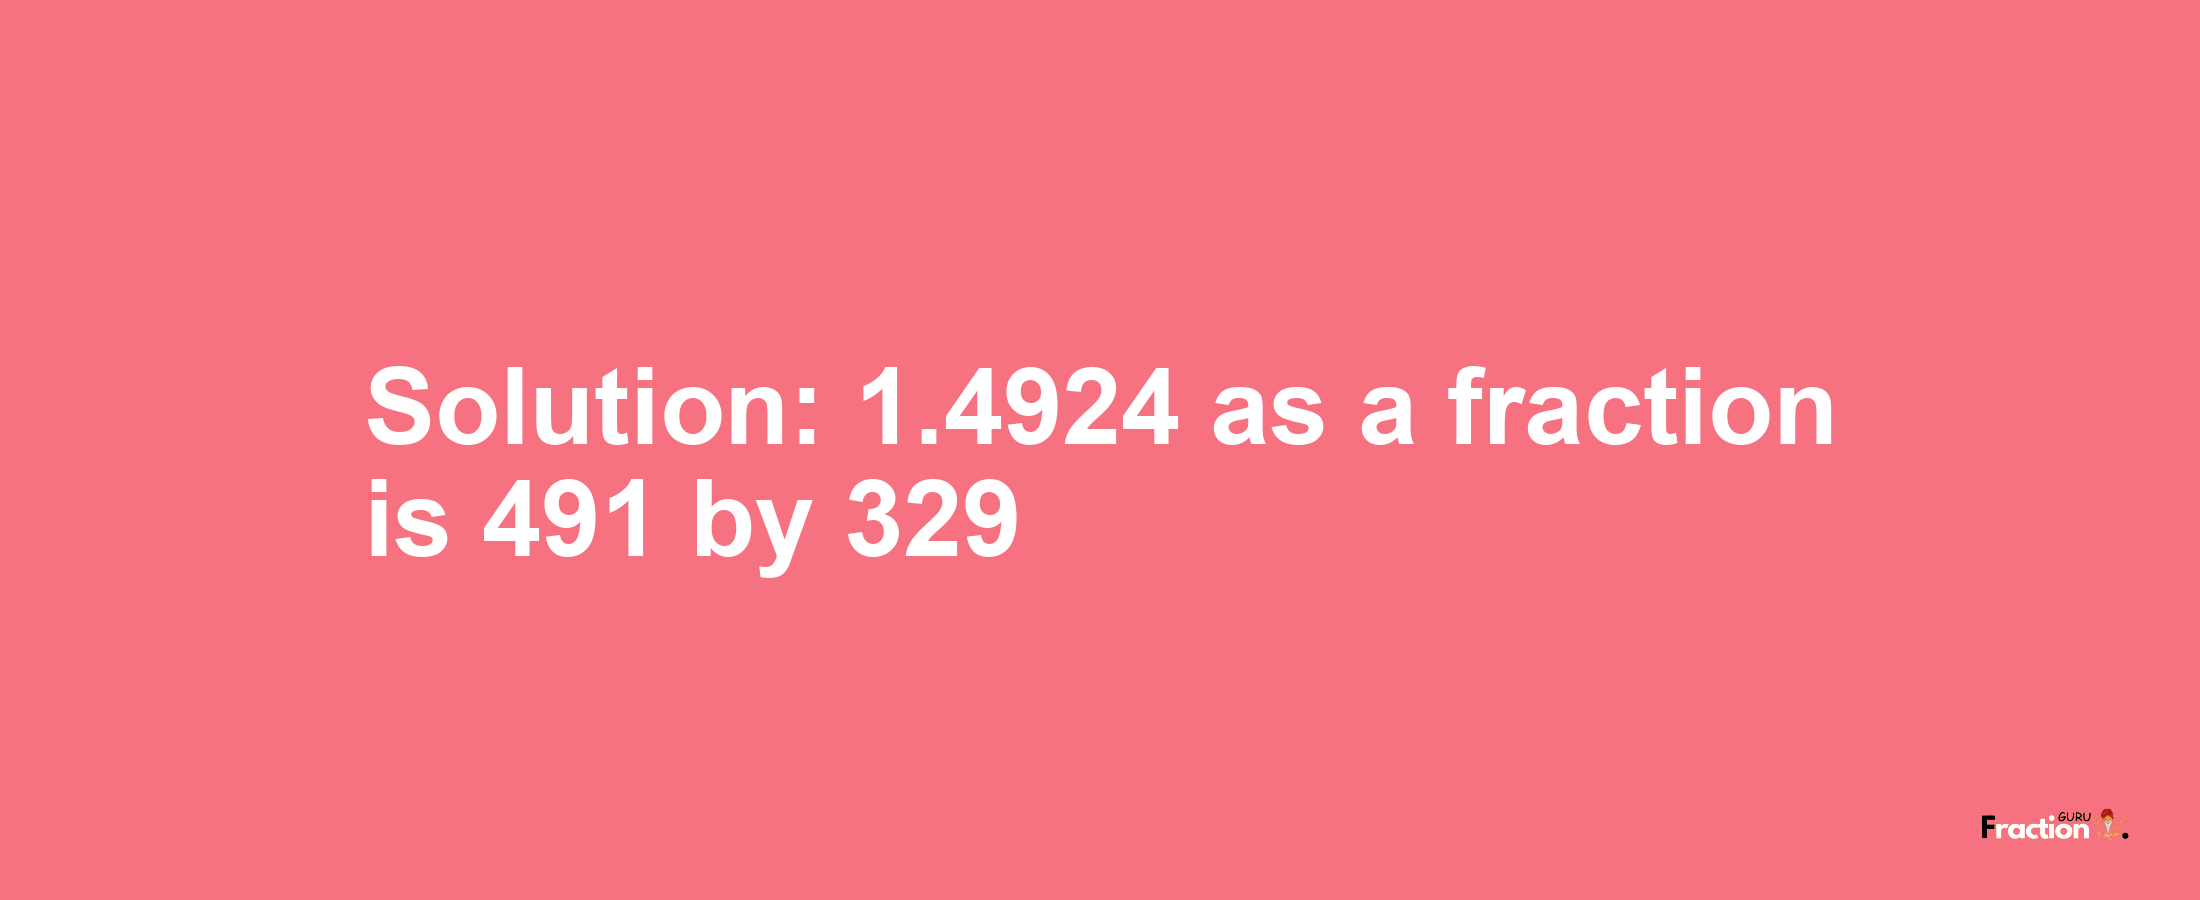 Solution:1.4924 as a fraction is 491/329